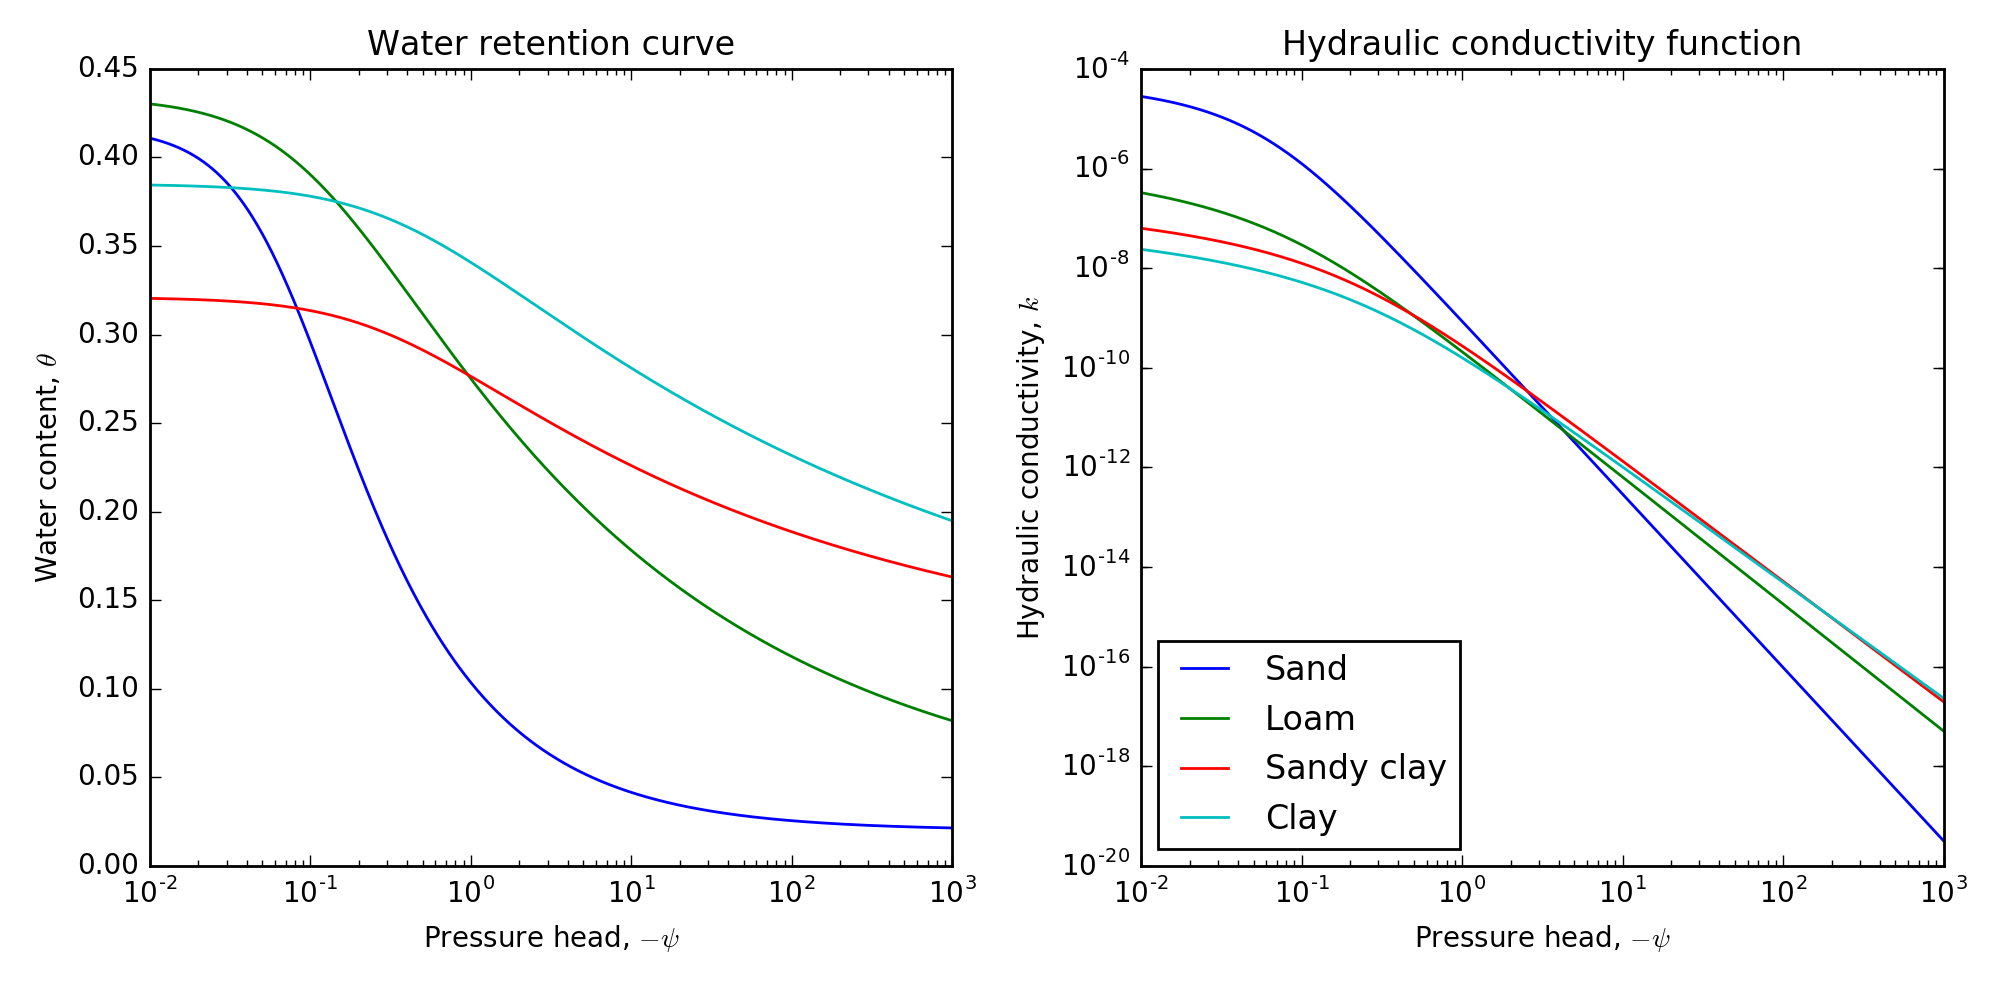 The water retention curve and the hydraulic conductivity function for four canonical soil types of sand, loam, sandy clay, and clay.